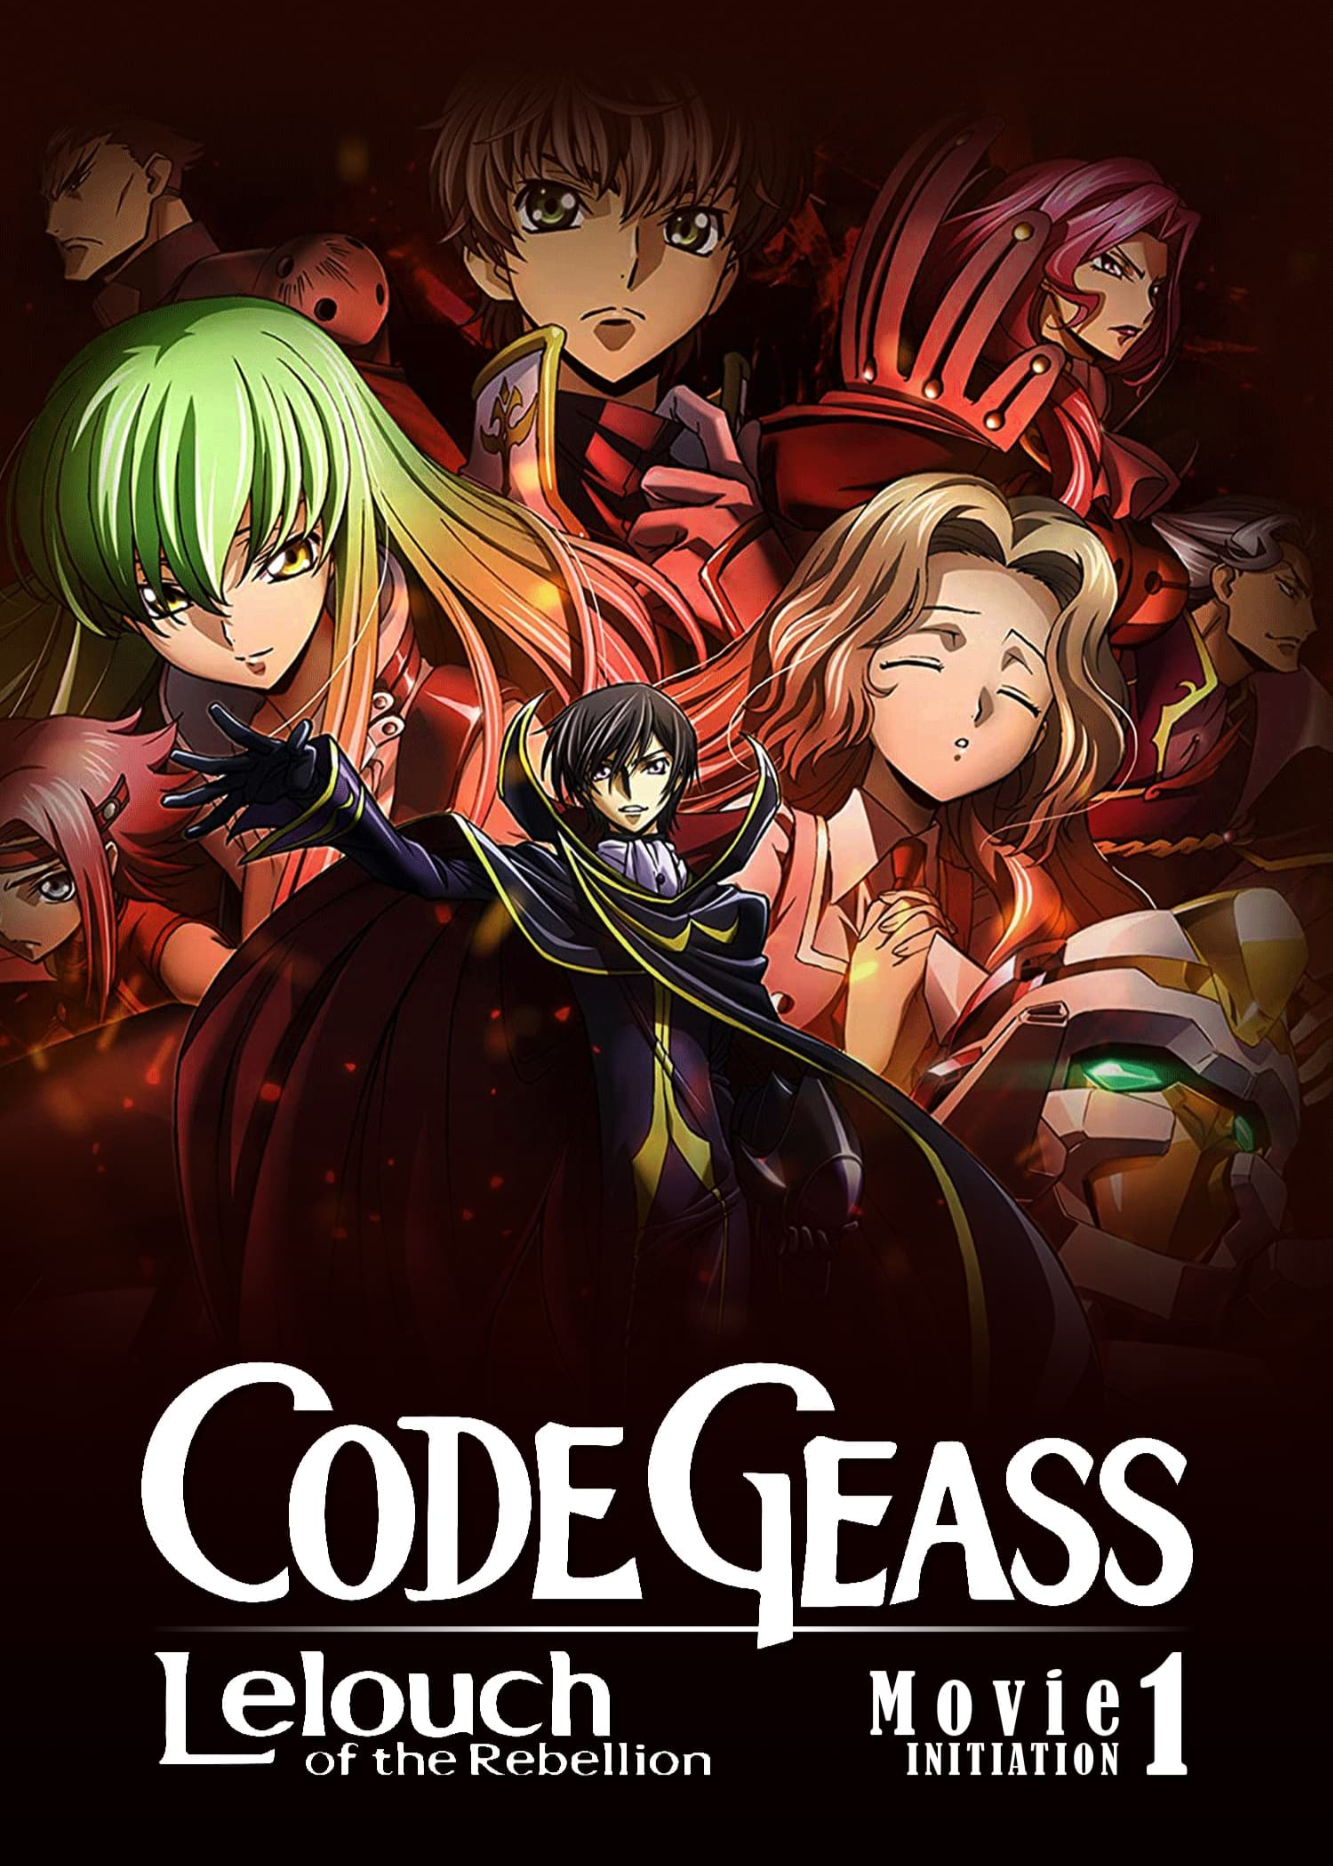 Banner Phim Code Geass: Lelouch Of The Rebellion I - Initiation (Code Geass: Lelouch Of The Rebellion I - Initiation)